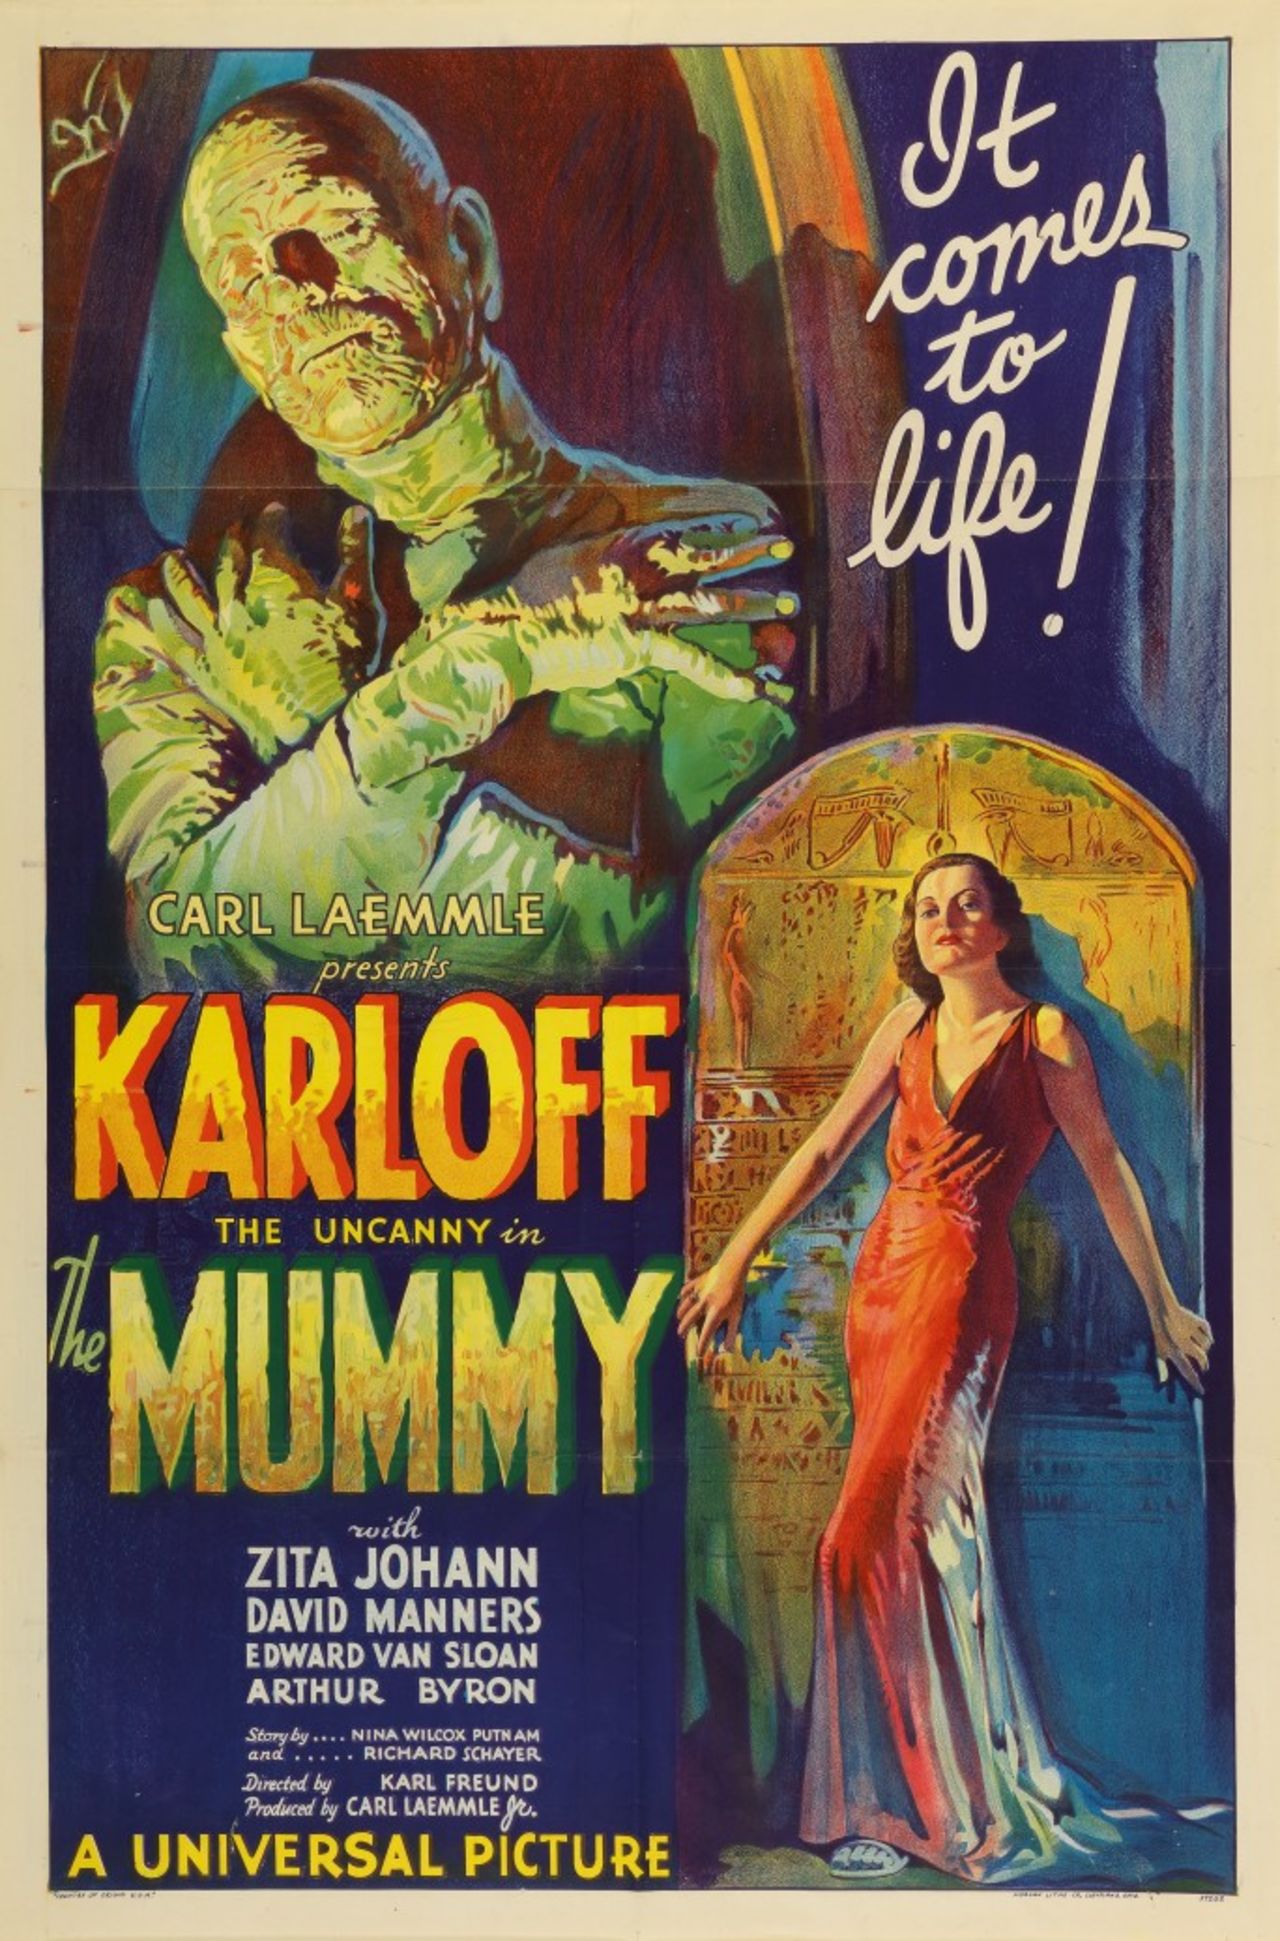 The original film poster of Karl Freund's The Mummy is expected to fetch more than $1 million.